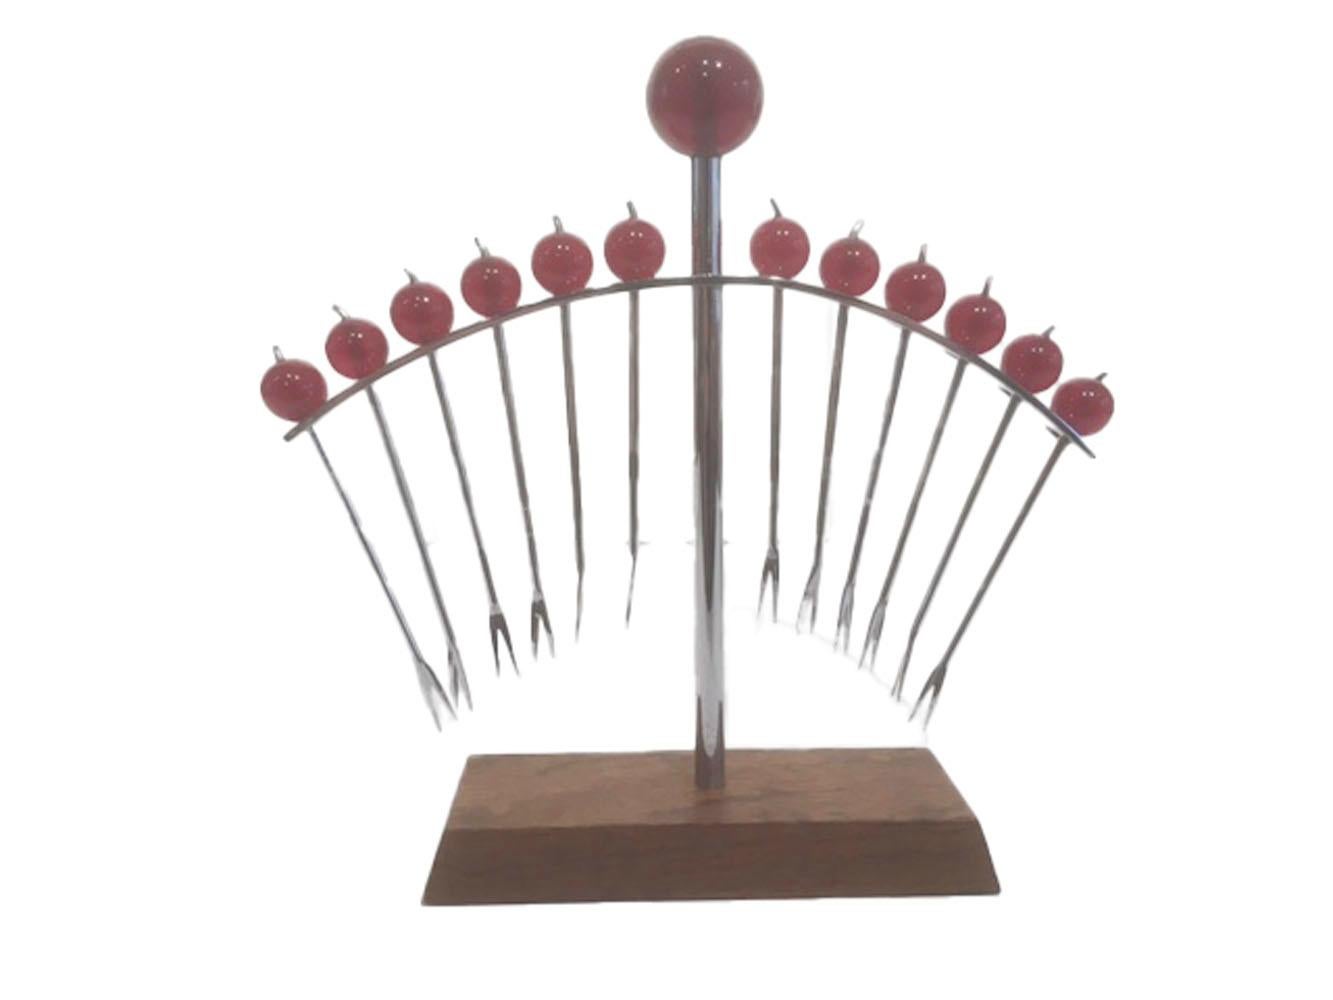 12 ball topped chrome cocktail picks with forked tips and red knops with chrome stems held in a 